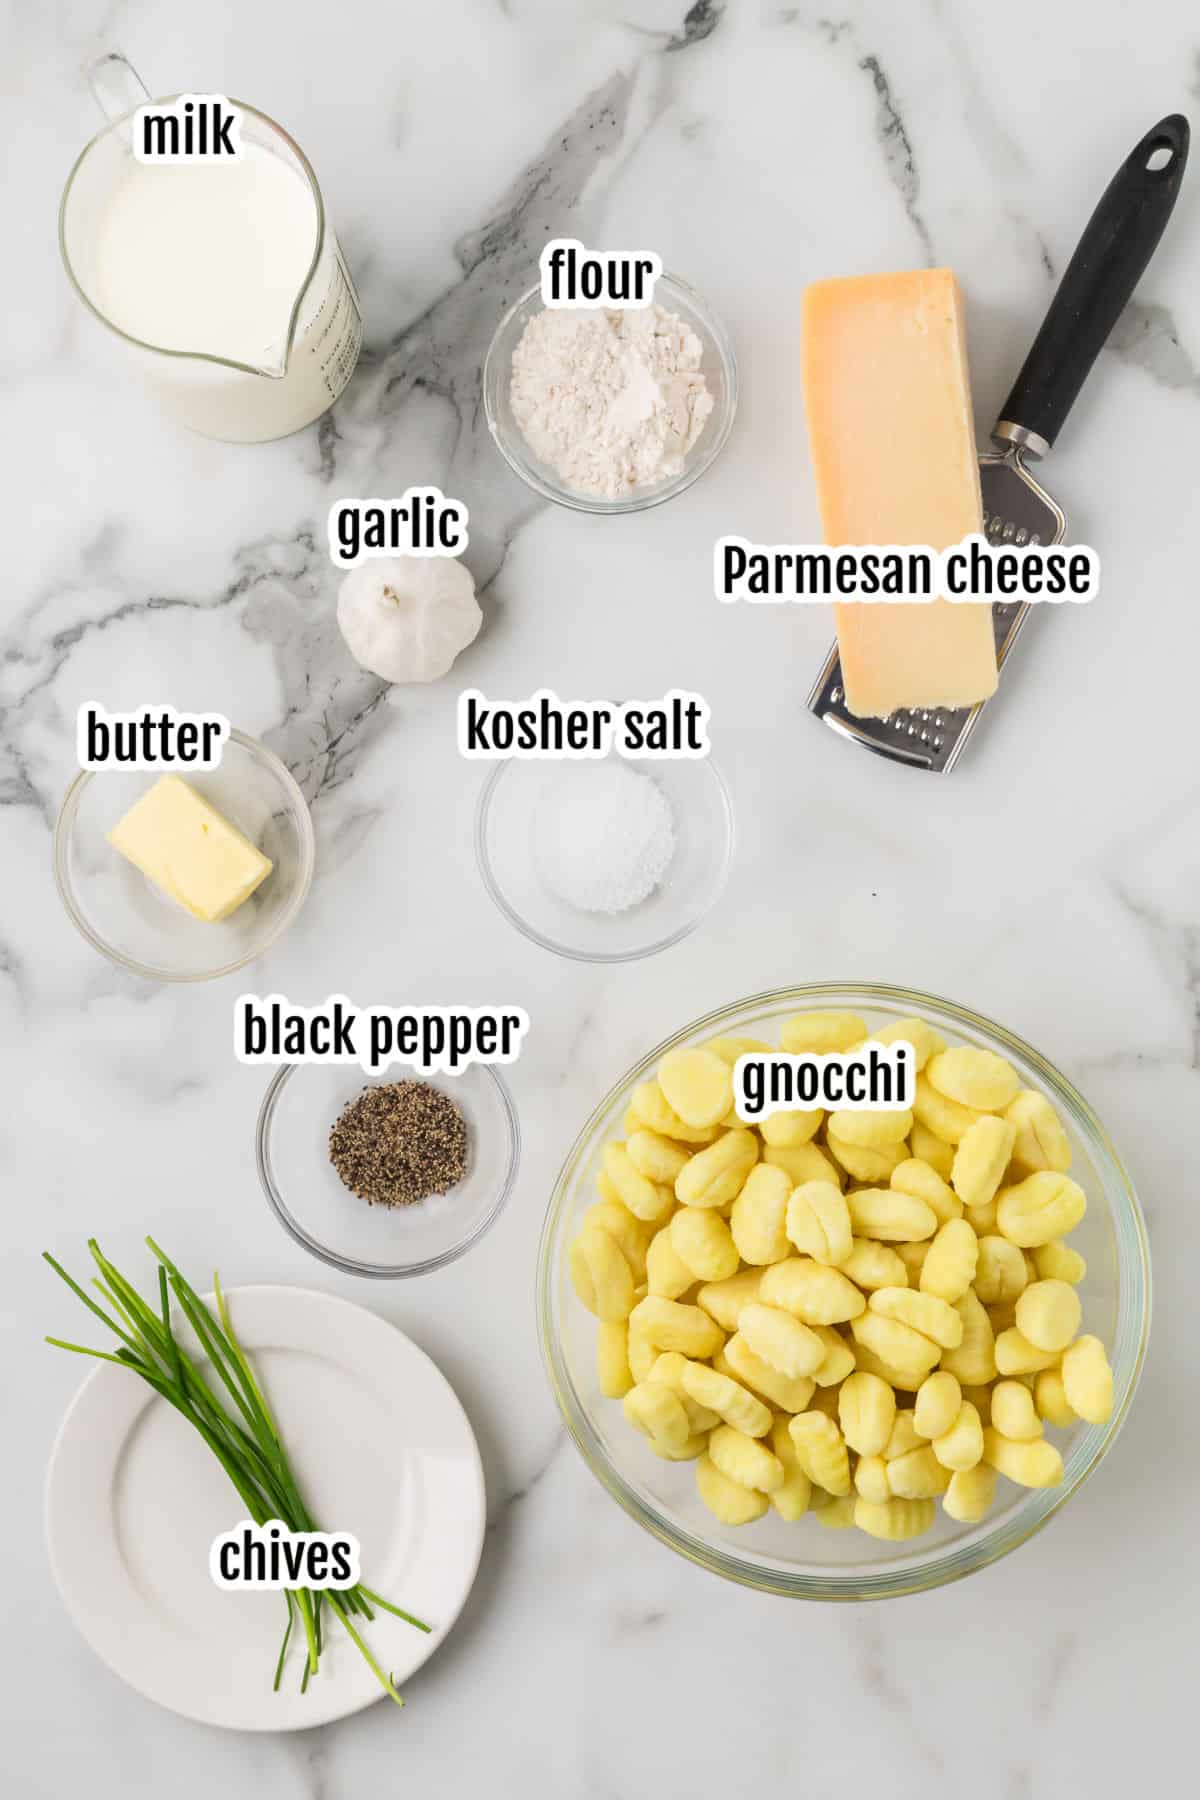 Image of the ingredients needed to make the baked potato gnocchi recipe. 